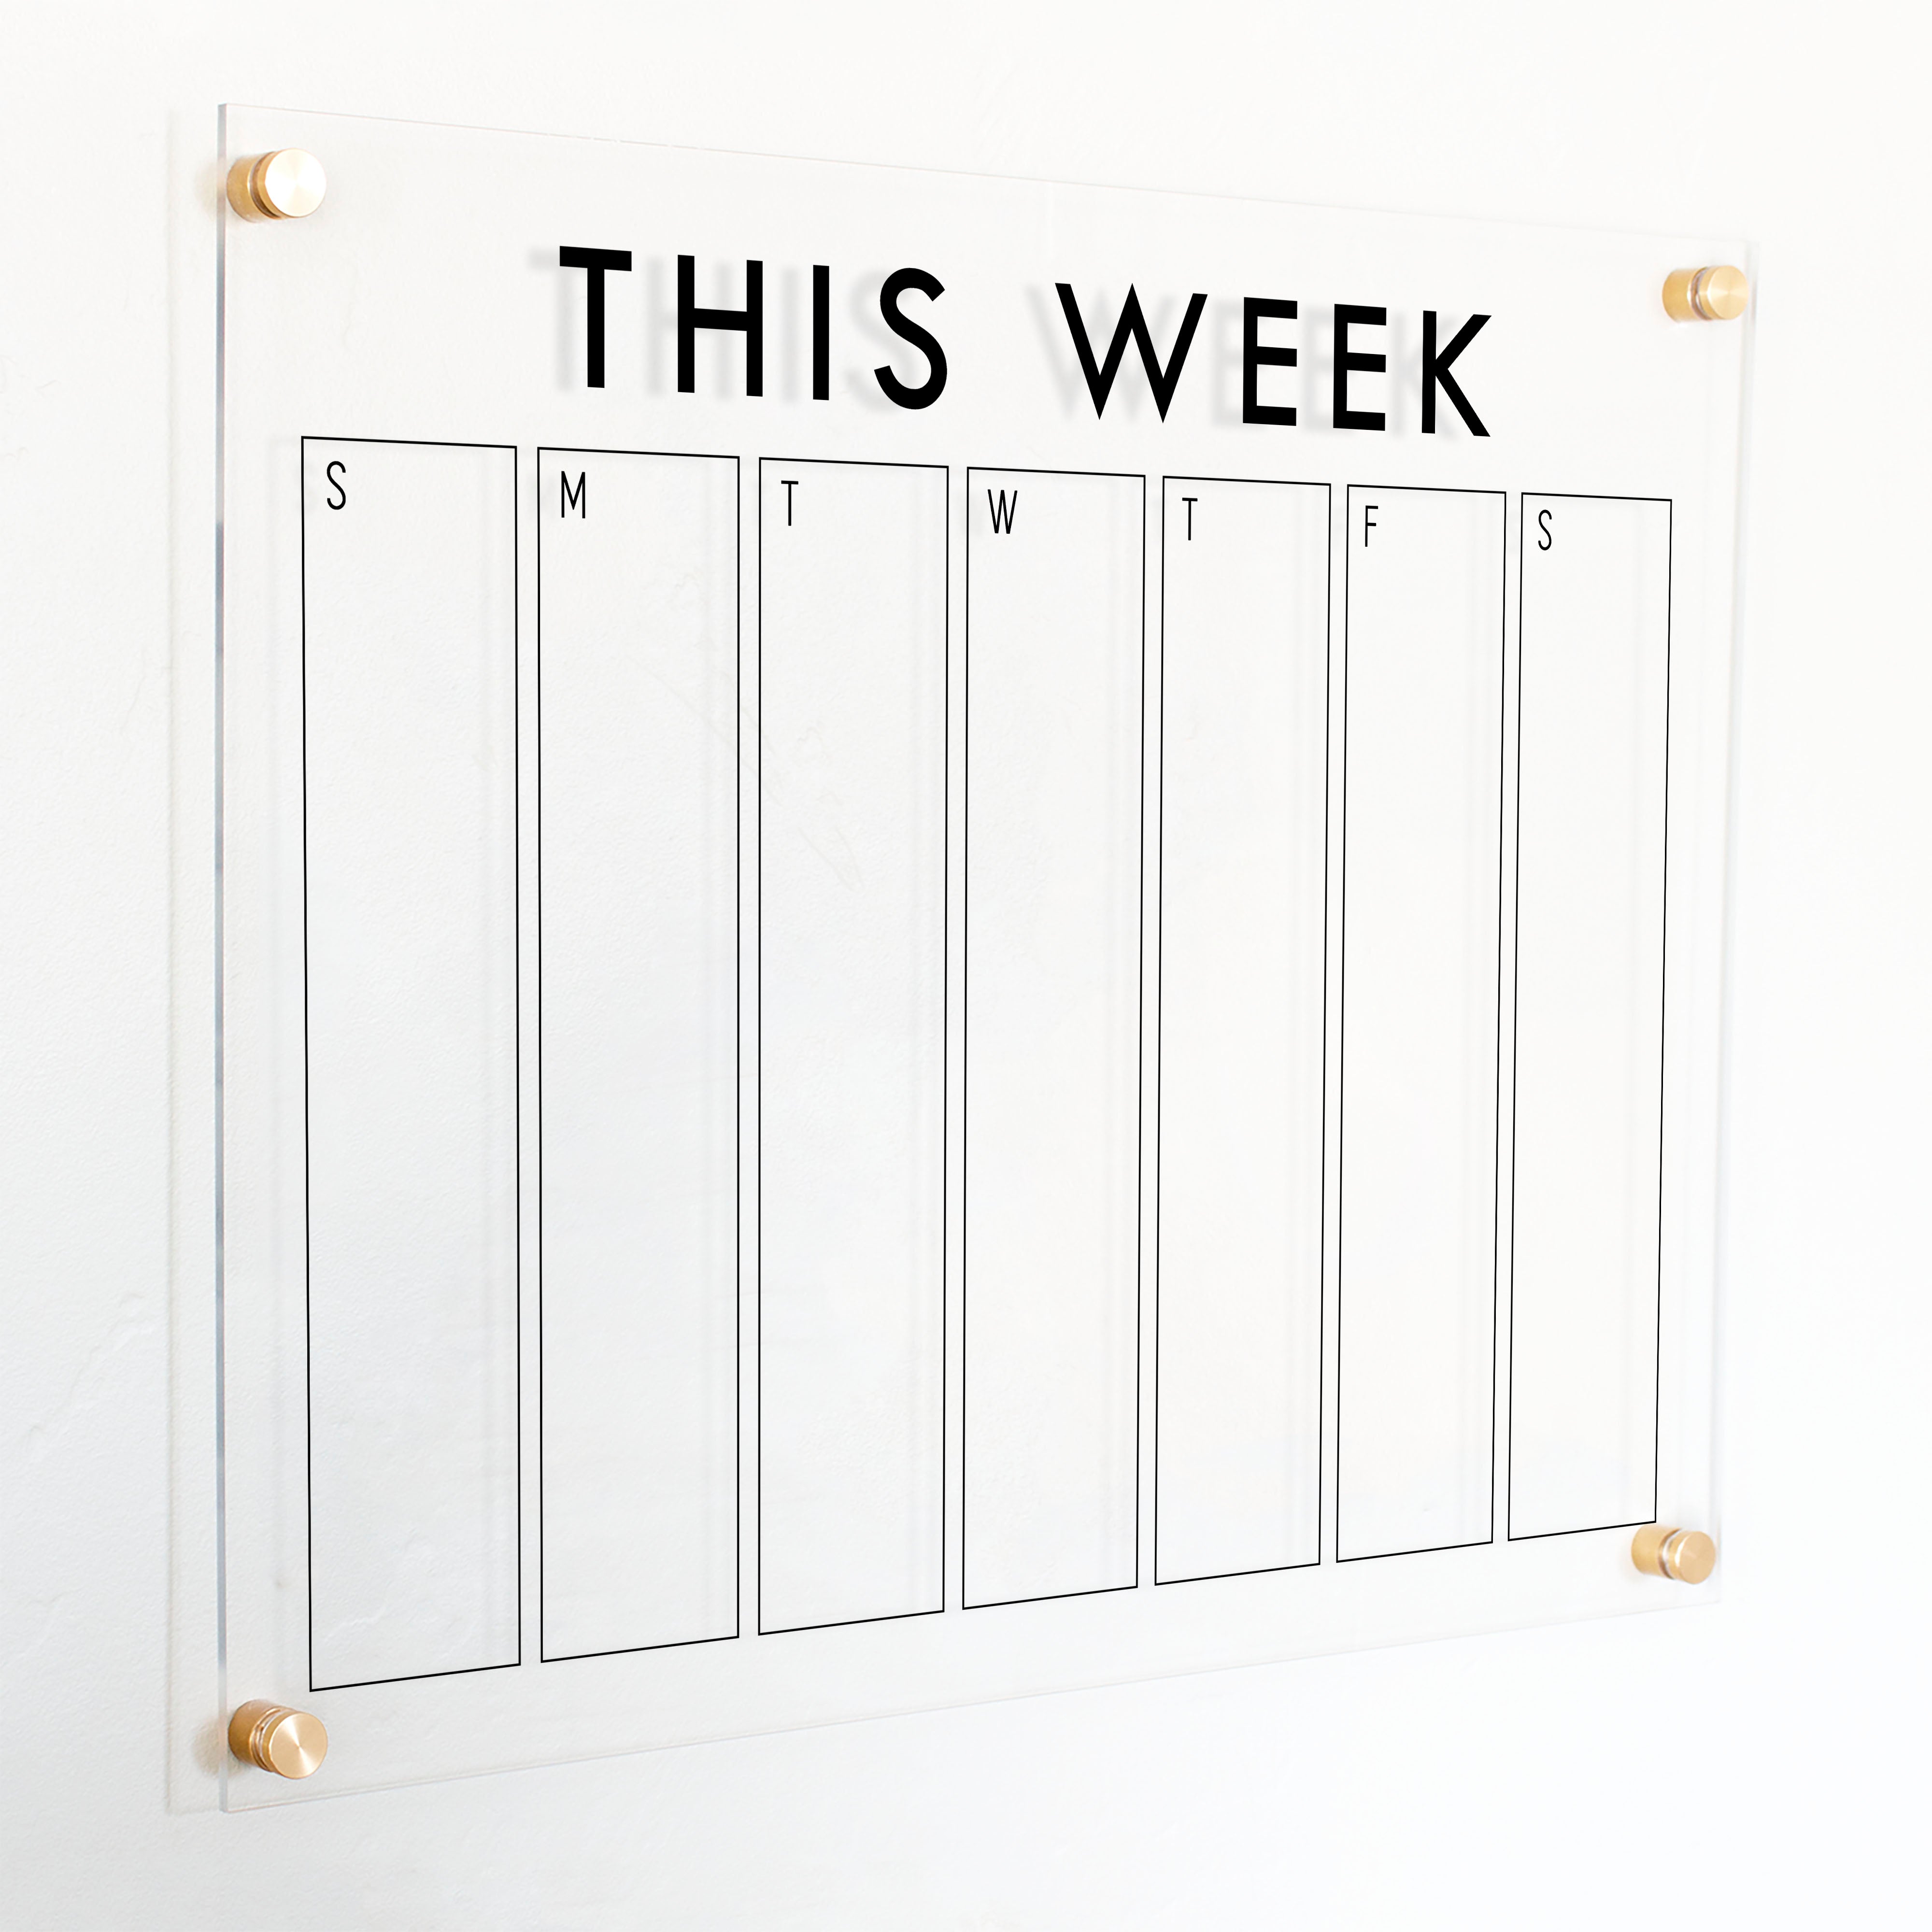 A Dry-erase weekly calender made of acrylic hanging on the wall